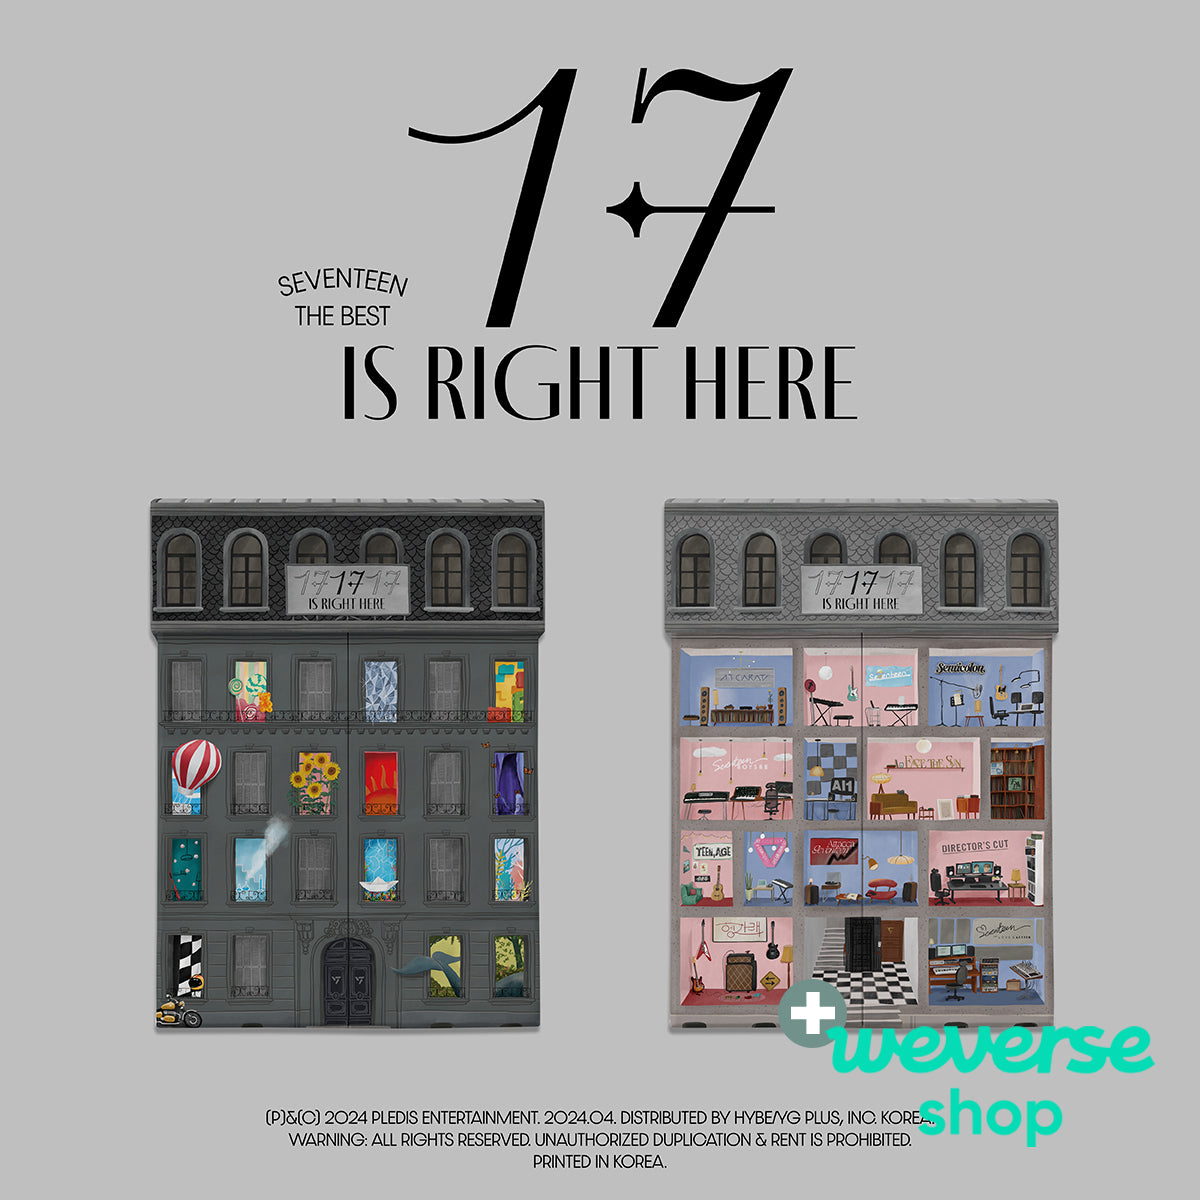 SEVENTEEN - 17 IS RIGHT HERE + Weverse Shop P.O.B